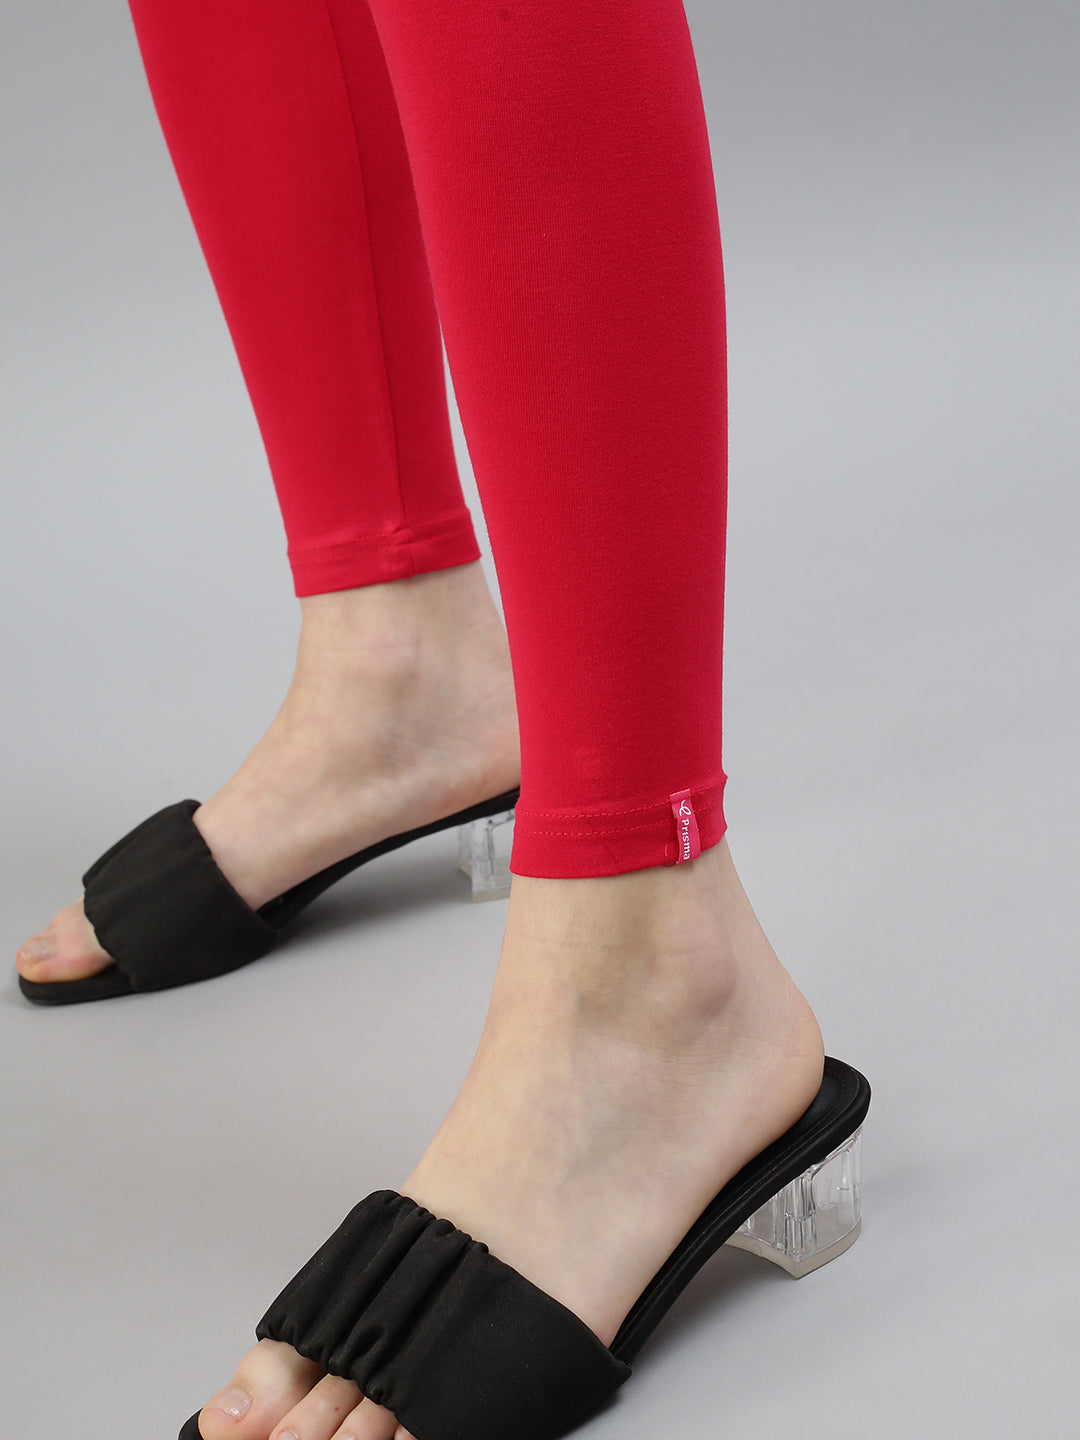 Prisma Ankle Leggings-S in Sundargarh at best price by Rounaq